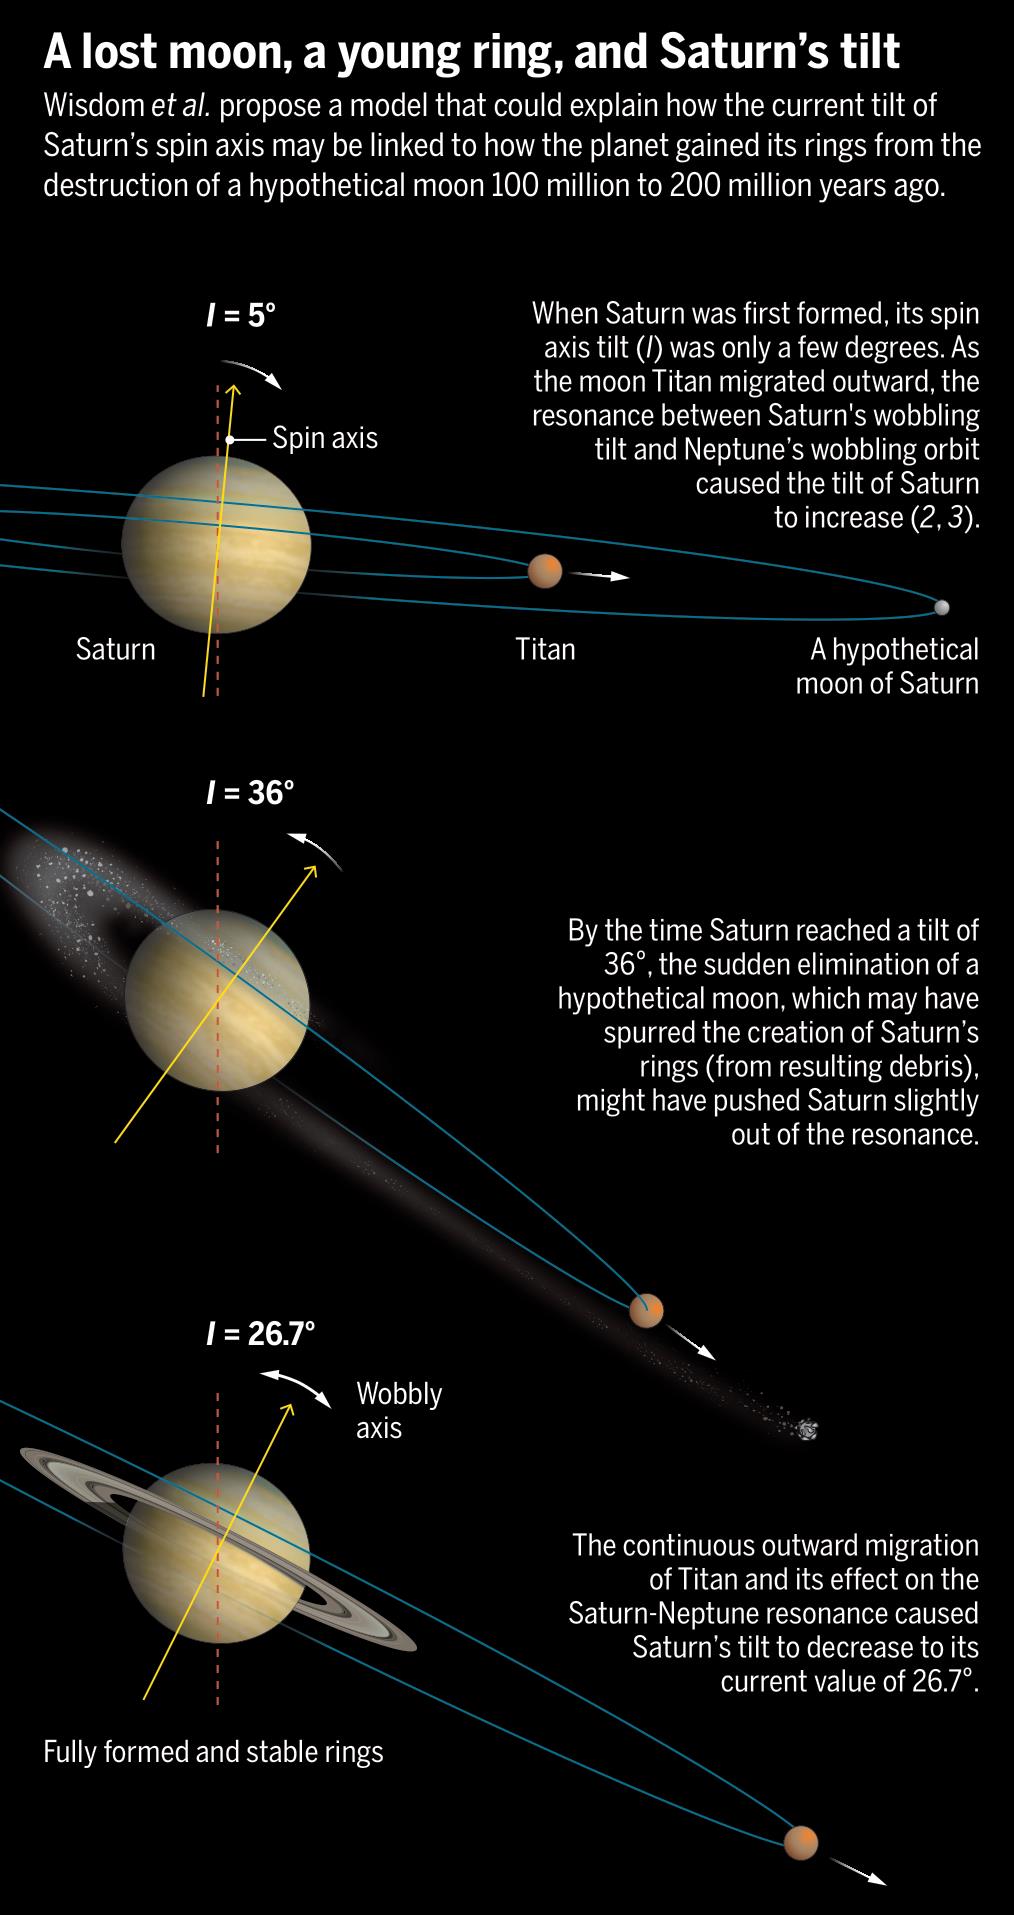 Curiosities: Why do some planets have rings?